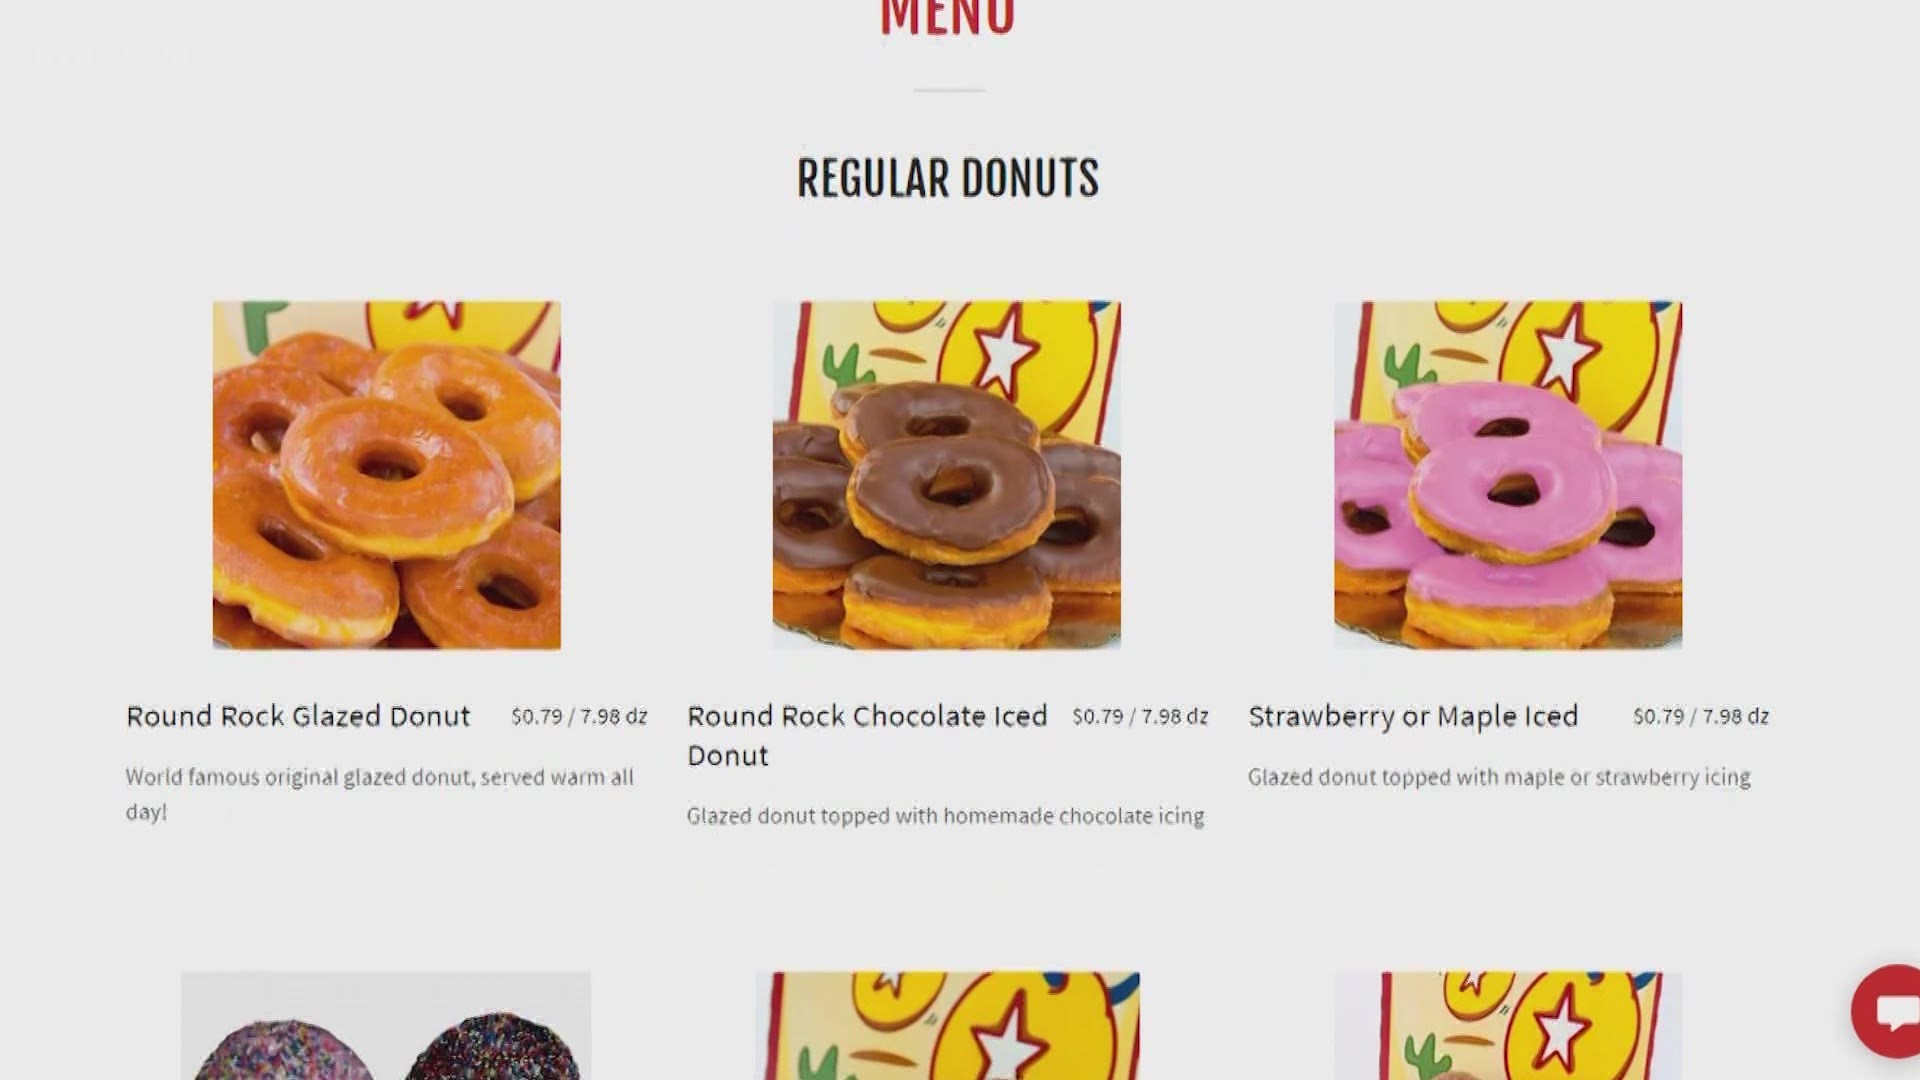 After 94 years, Round Rock Donuts plans to open a second location.